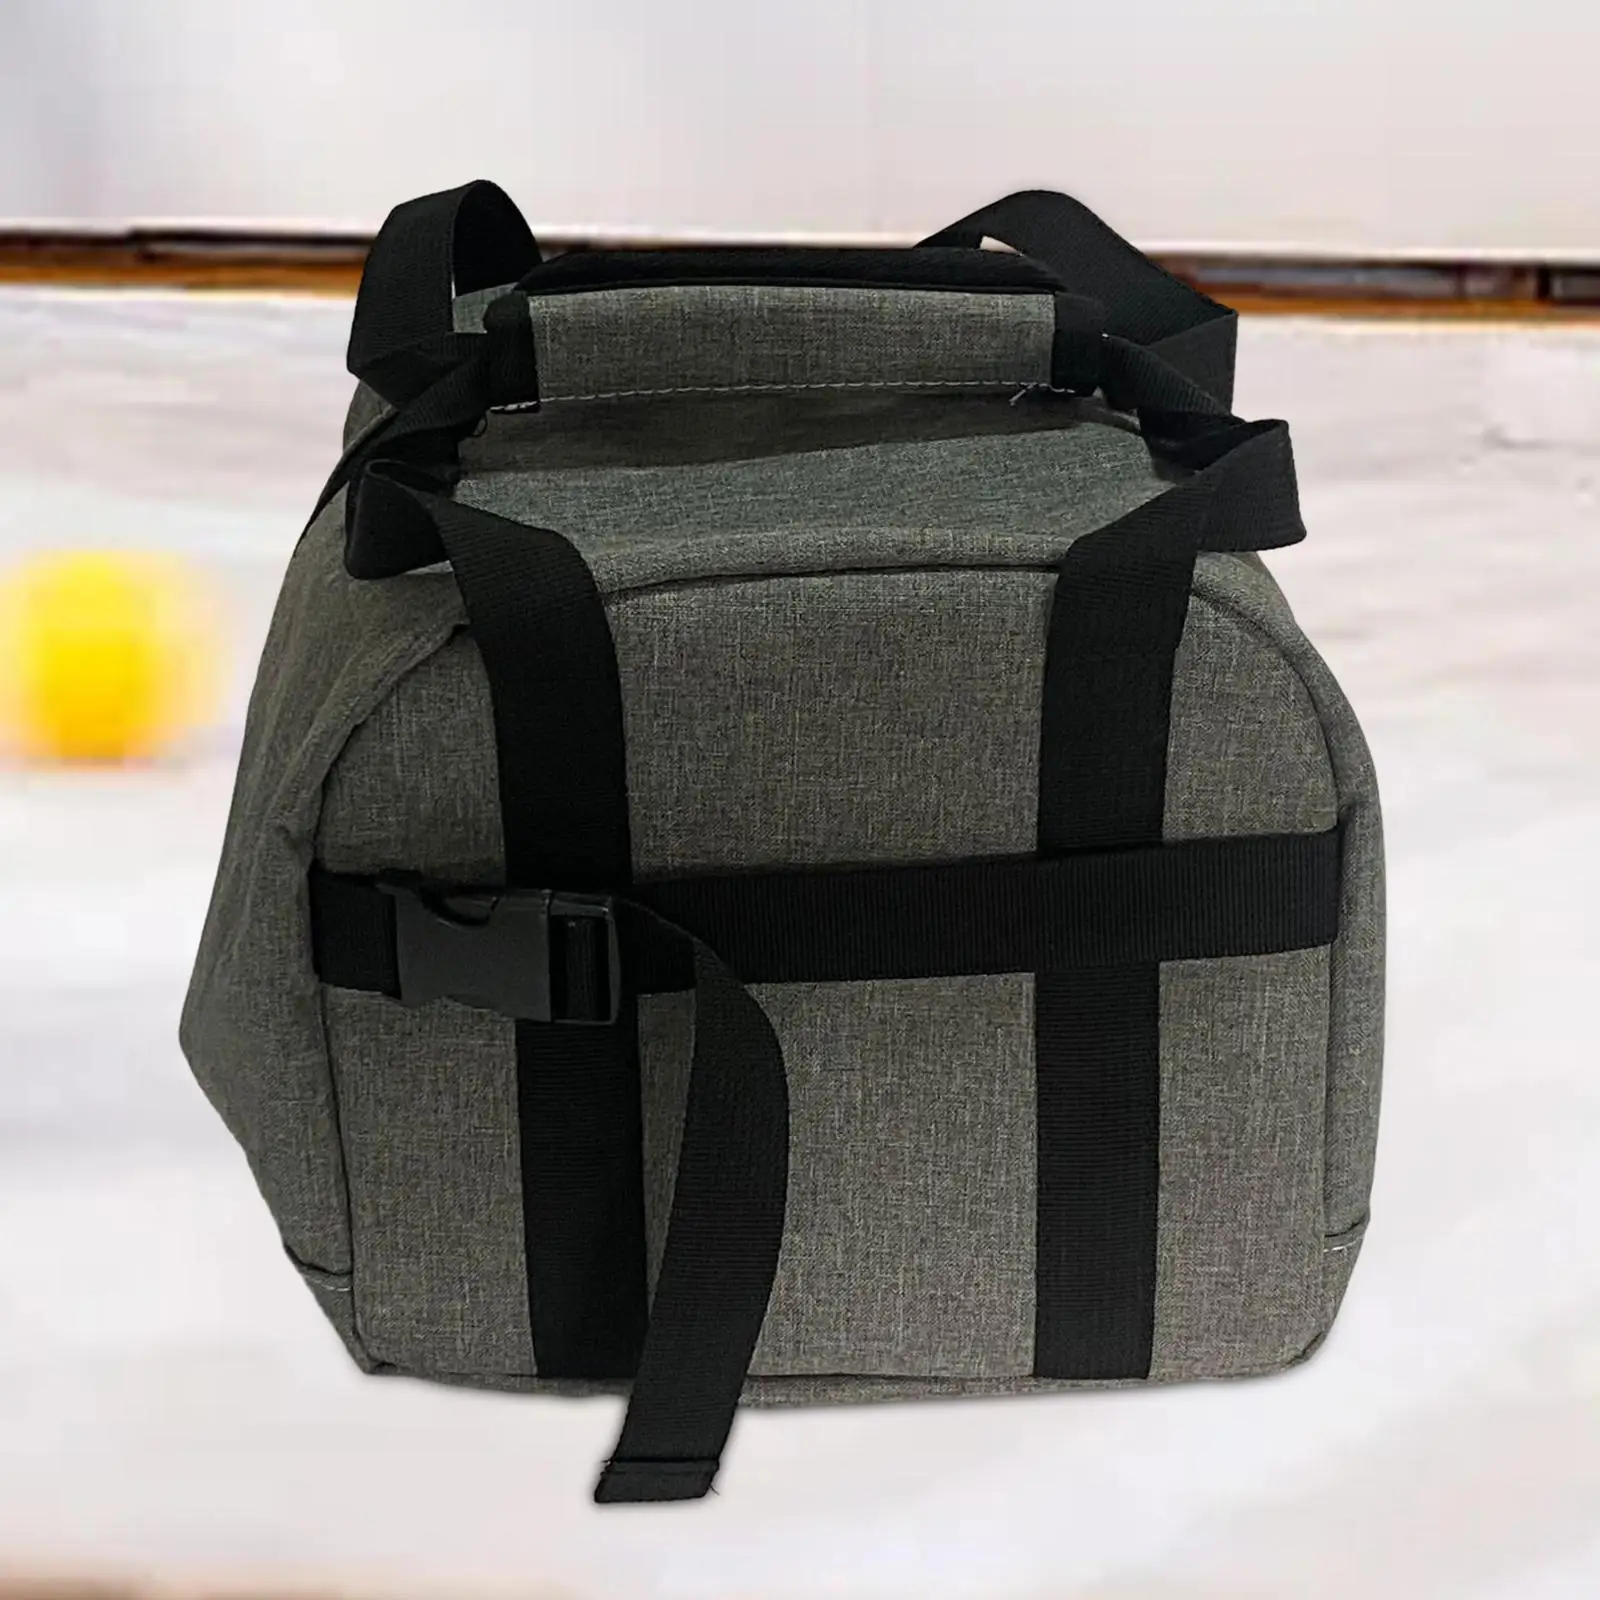 Single Bowling Ball Bag with External Mesh Pocket Carry Bag Carrier Double Zipper Easy to Carry Compact Handbag Bowling Gift